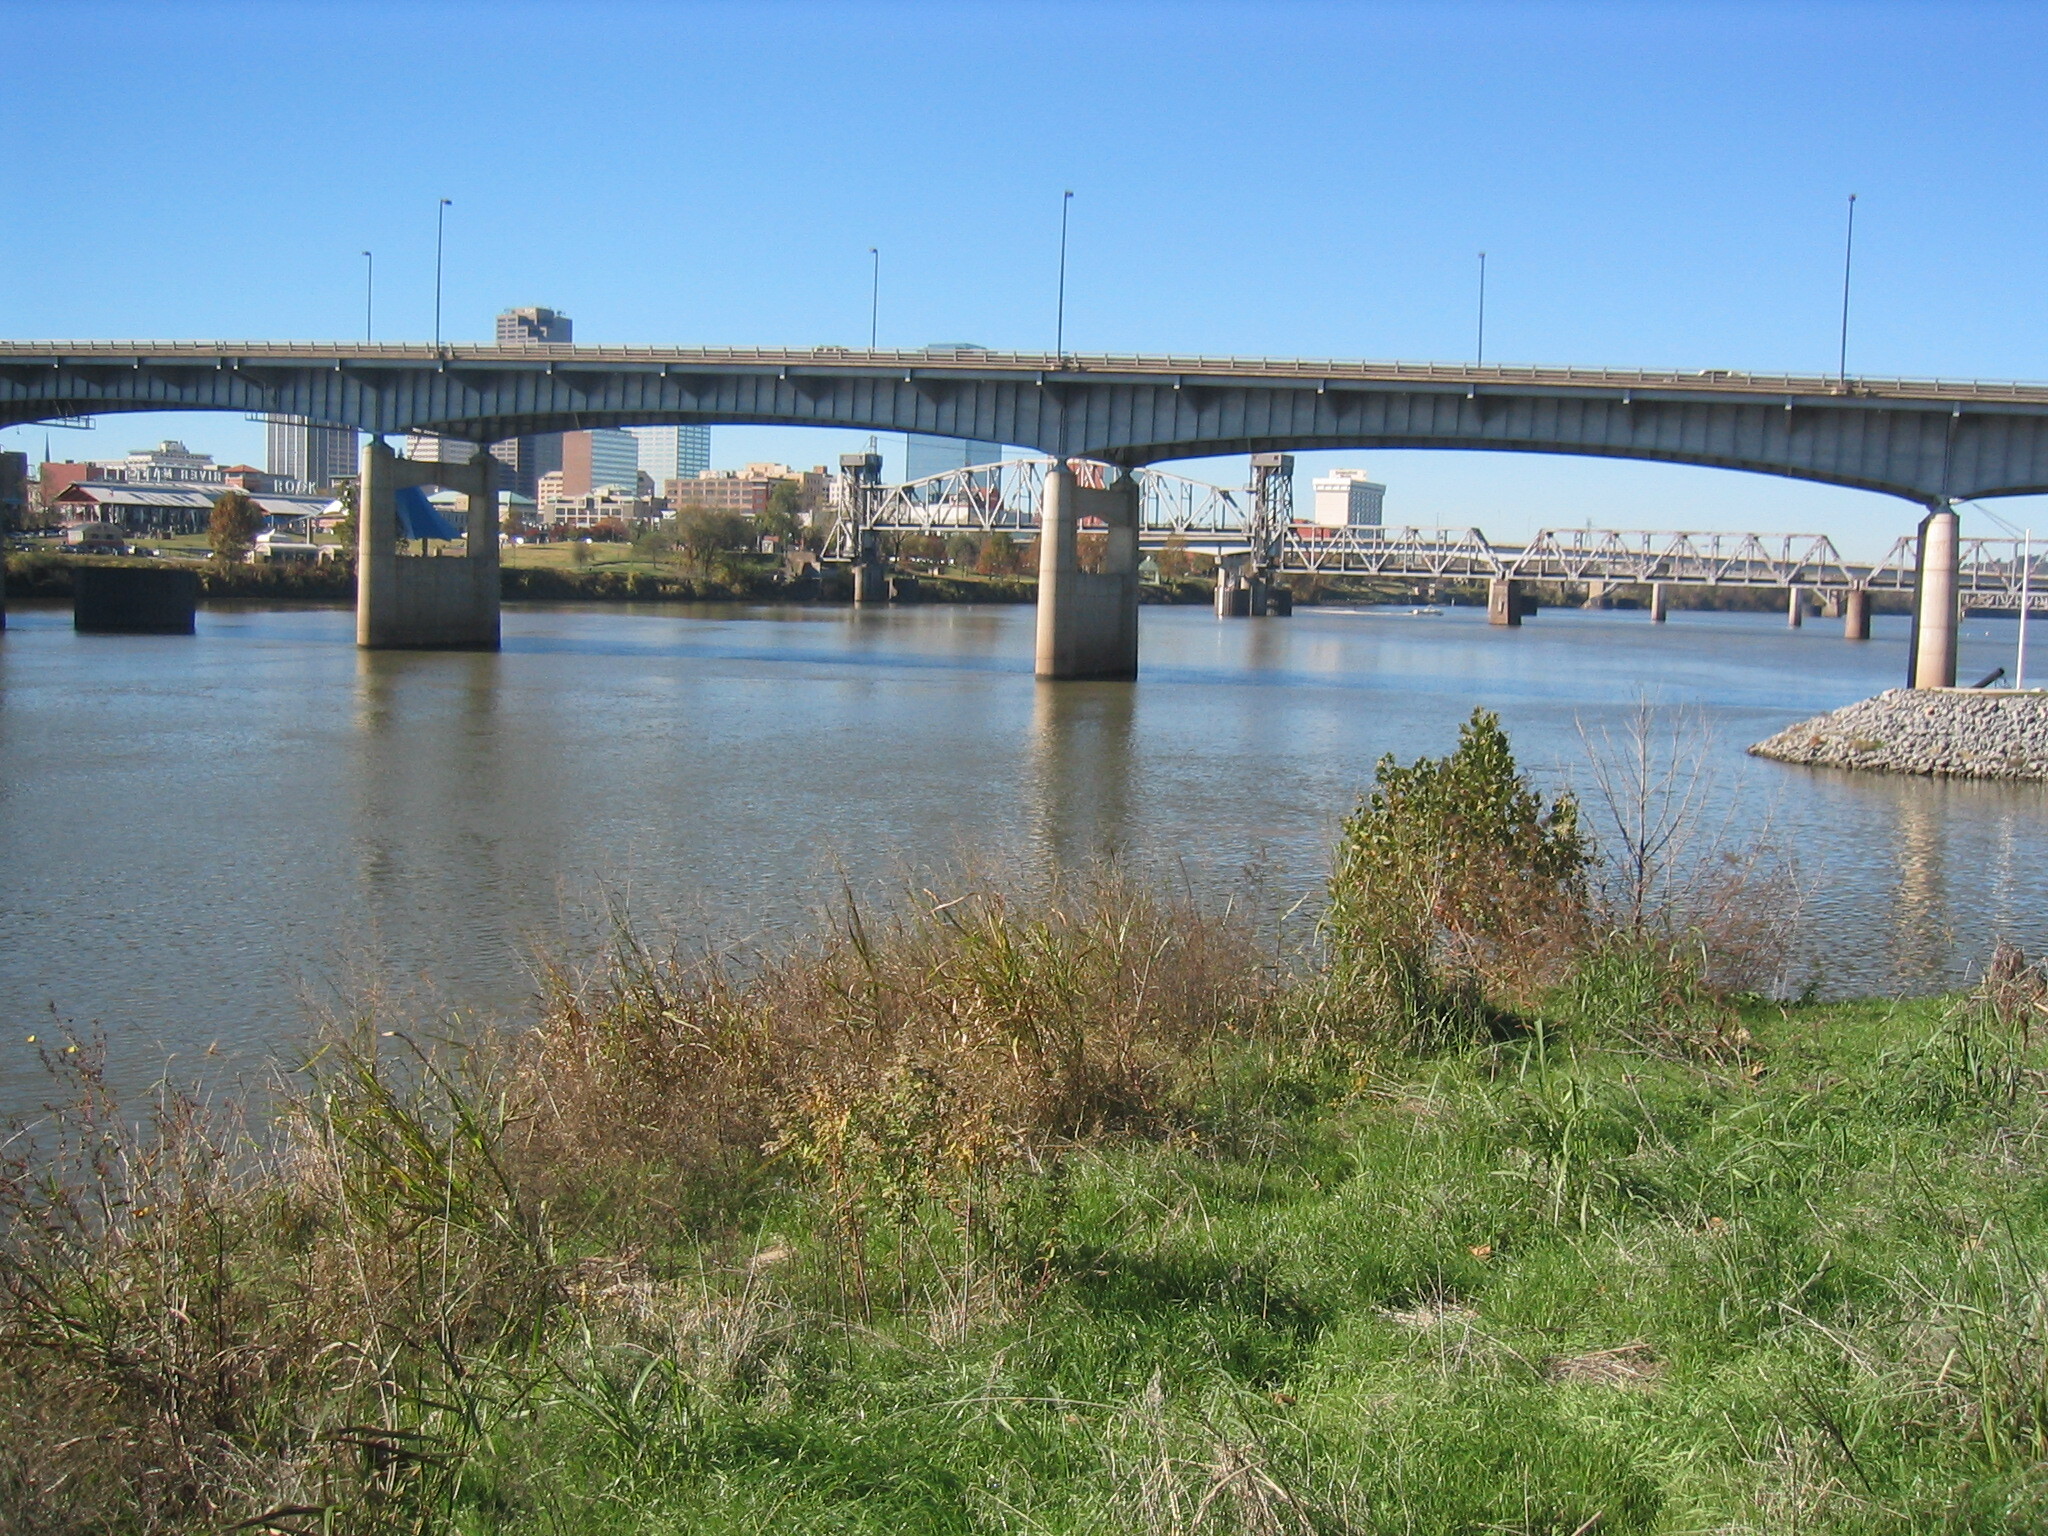 A view of Little Rock, Arkansas from the banks of North Little Rock, Arkansas